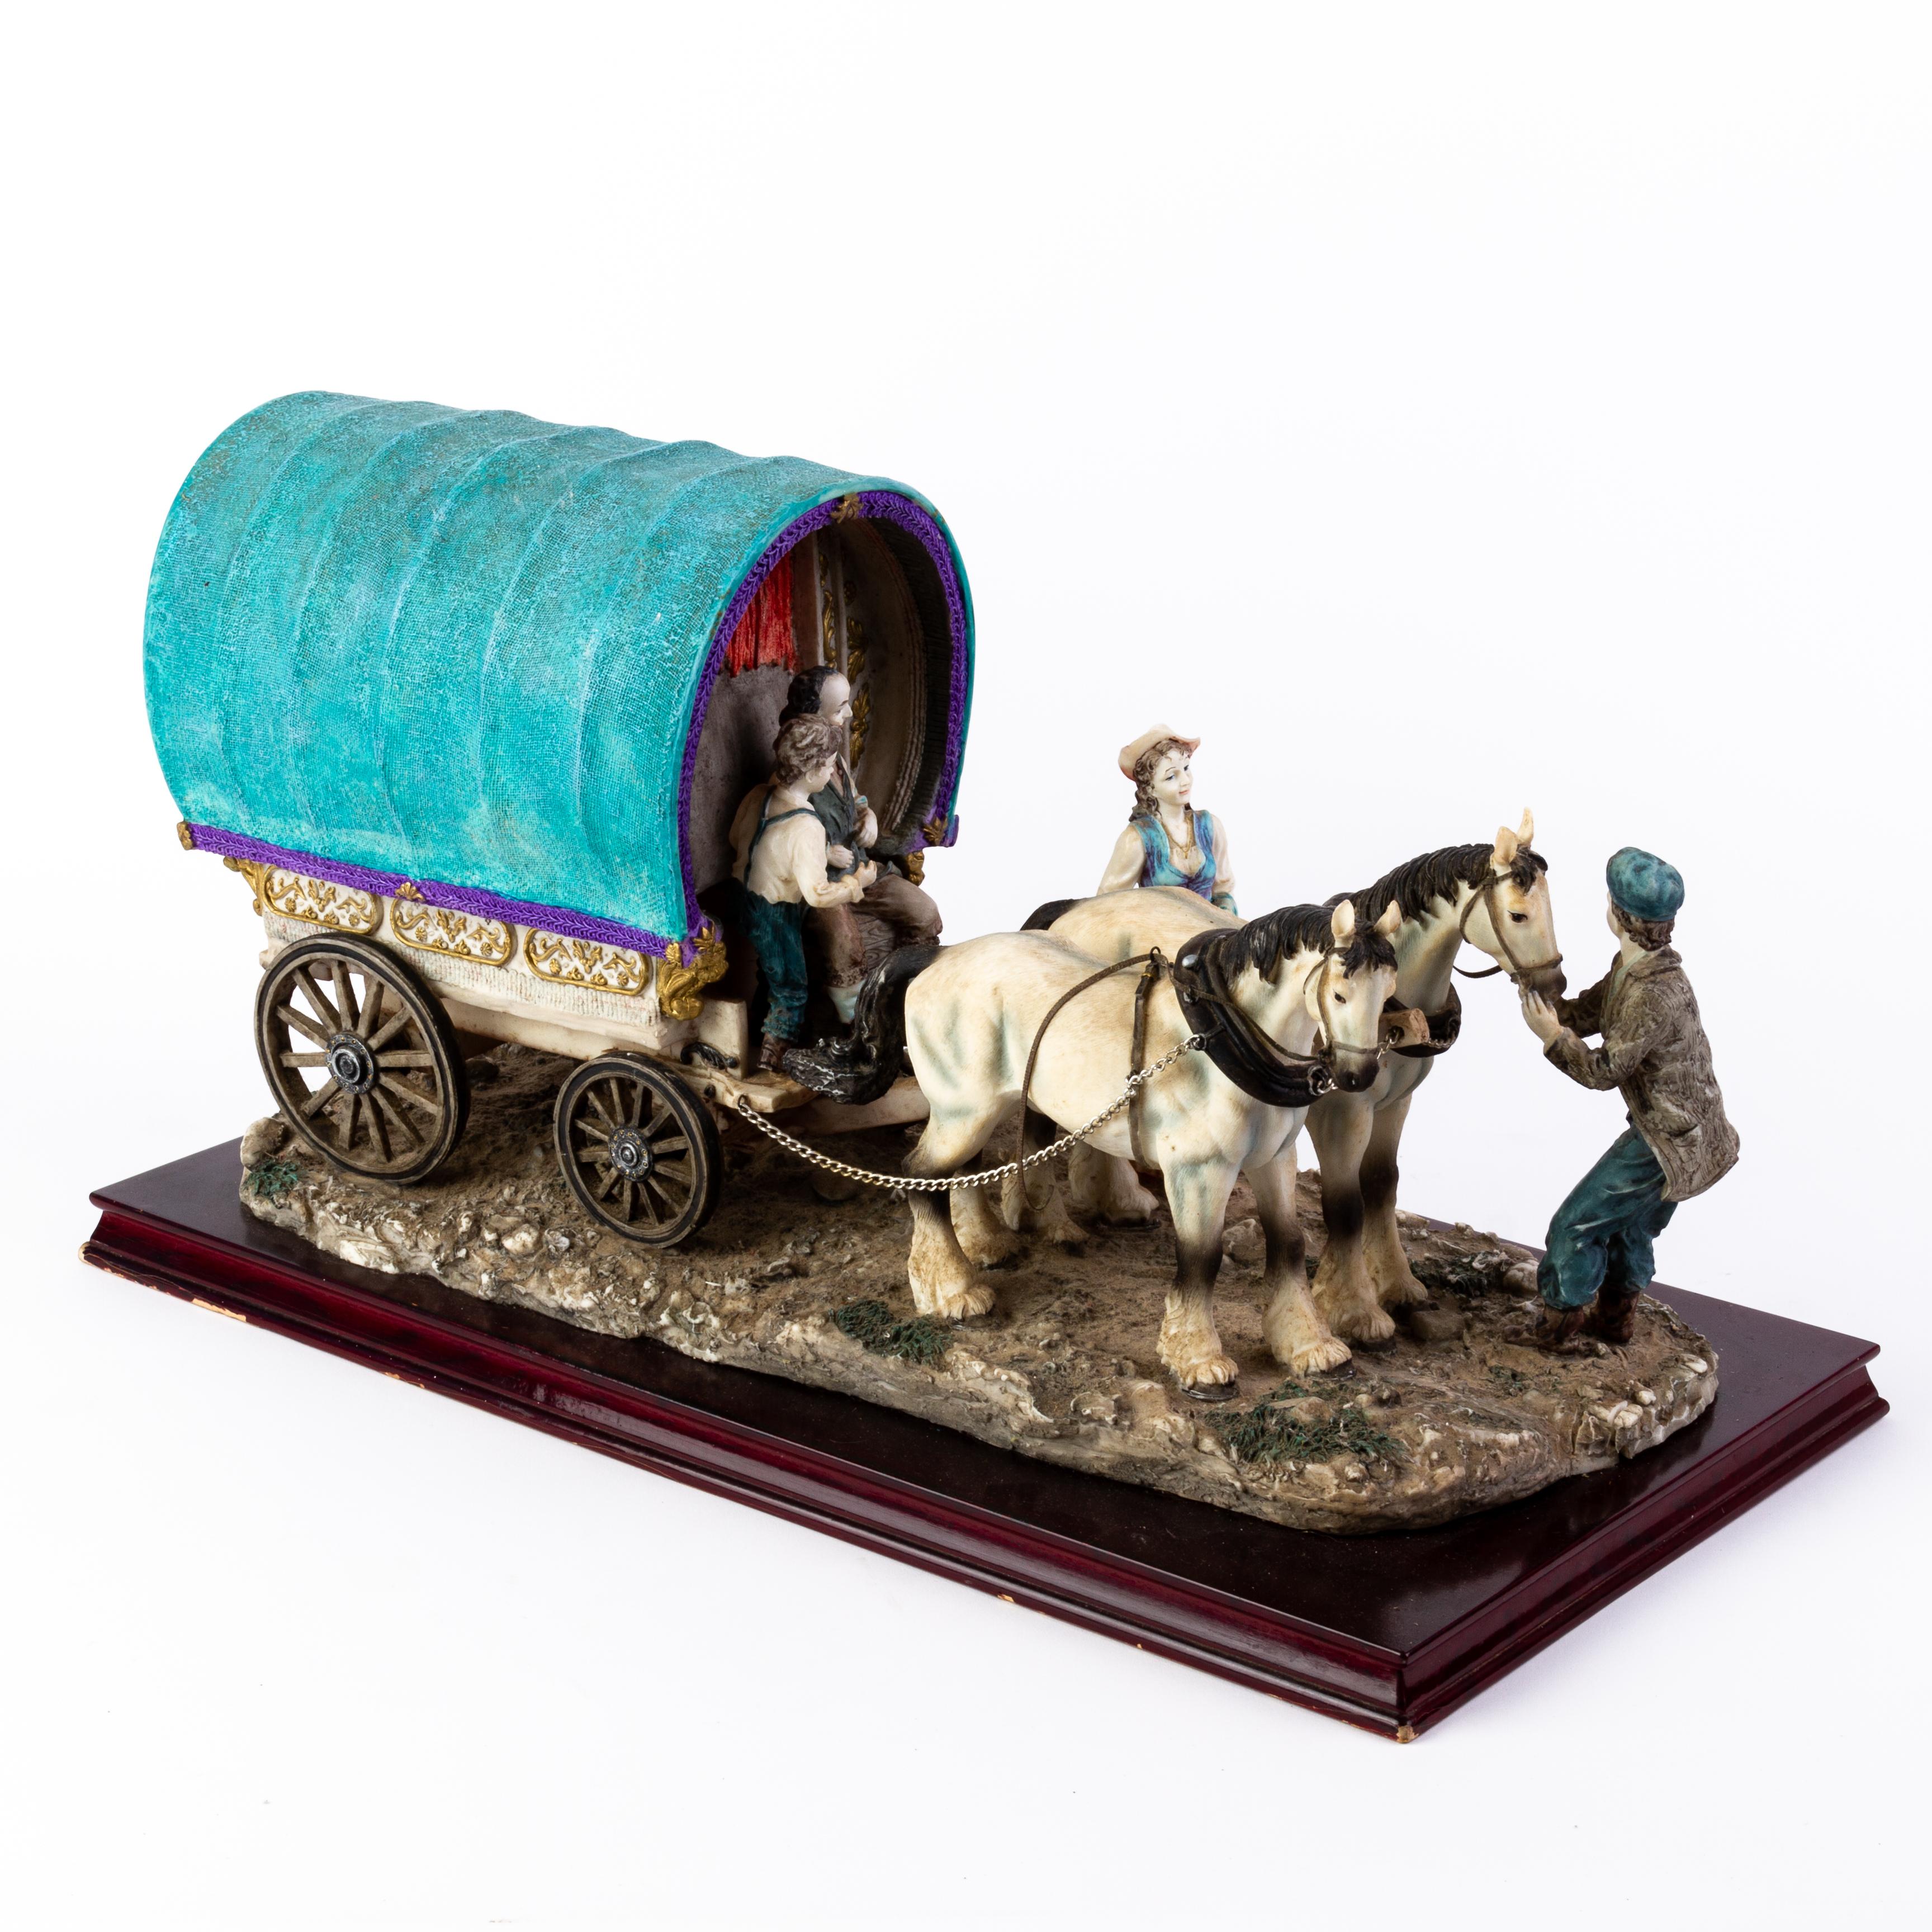 In good condition
From a private collection
Free international shipping
Juliana Collection Gipsy Caravan Sculpture 